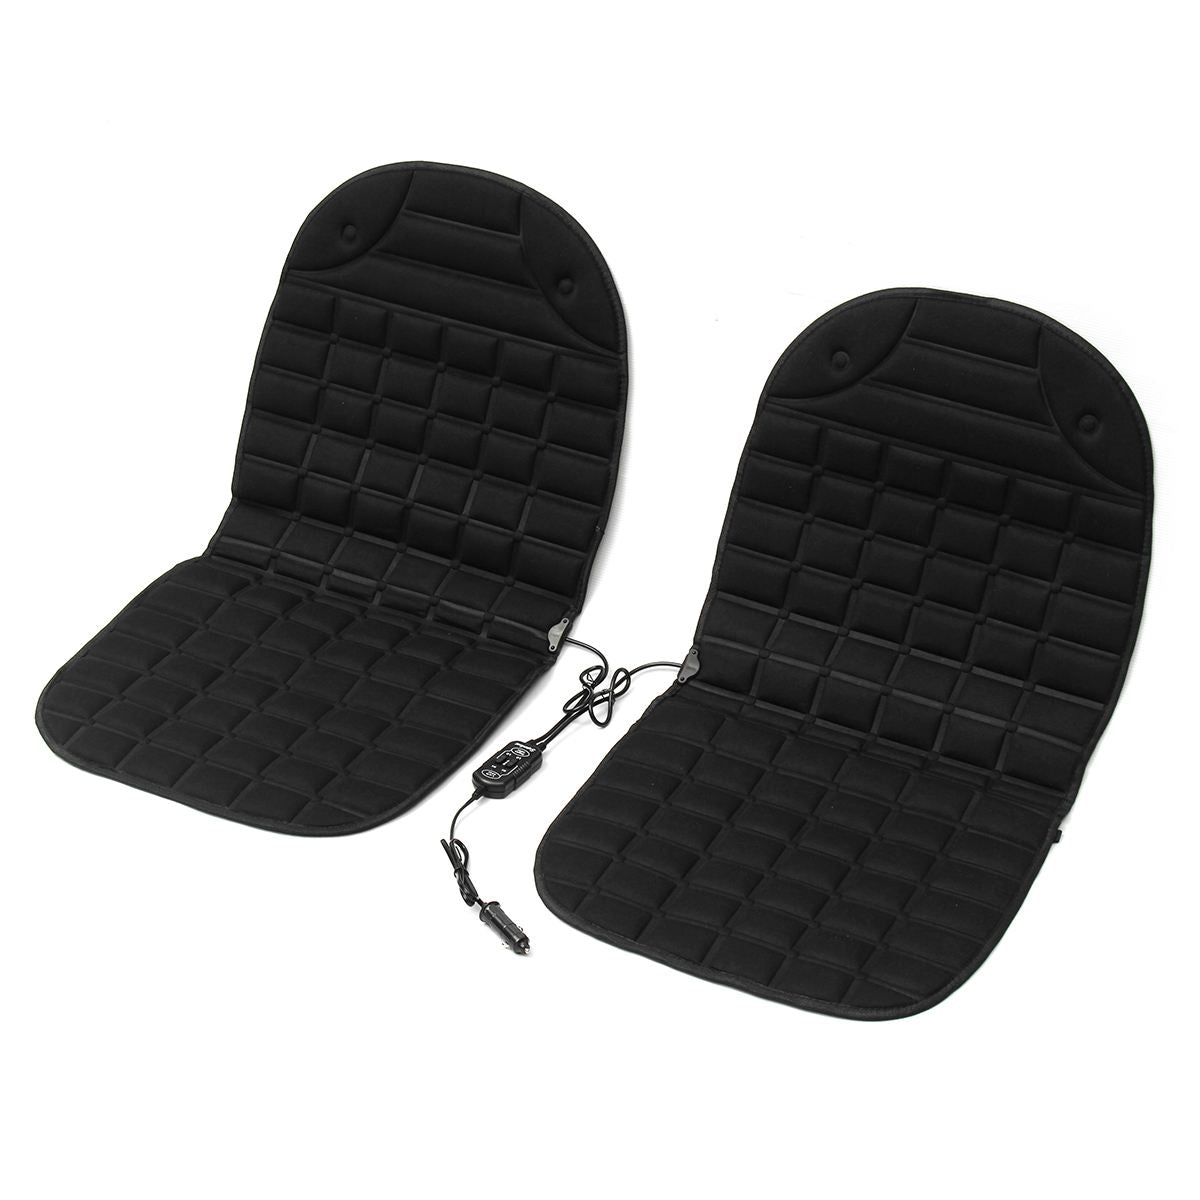 2PCS 12V Universal Fast Thicken Heated Car Seat Cushion Cover Electric –  coldiscoming